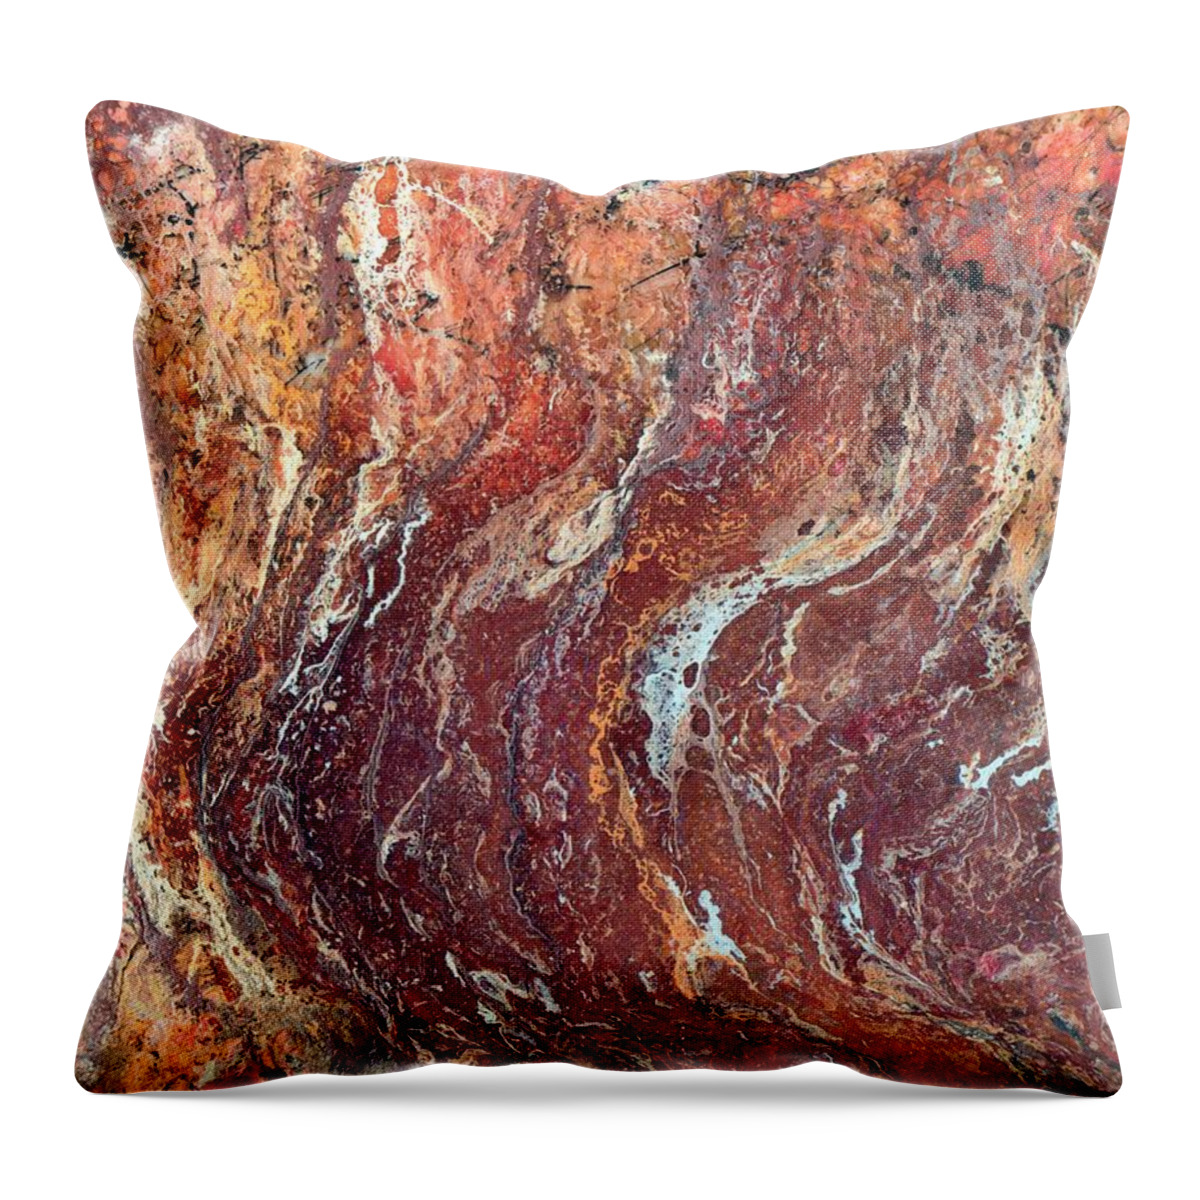 Resin Art Throw Pillow featuring the painting Desert Canyon by Jane Biven